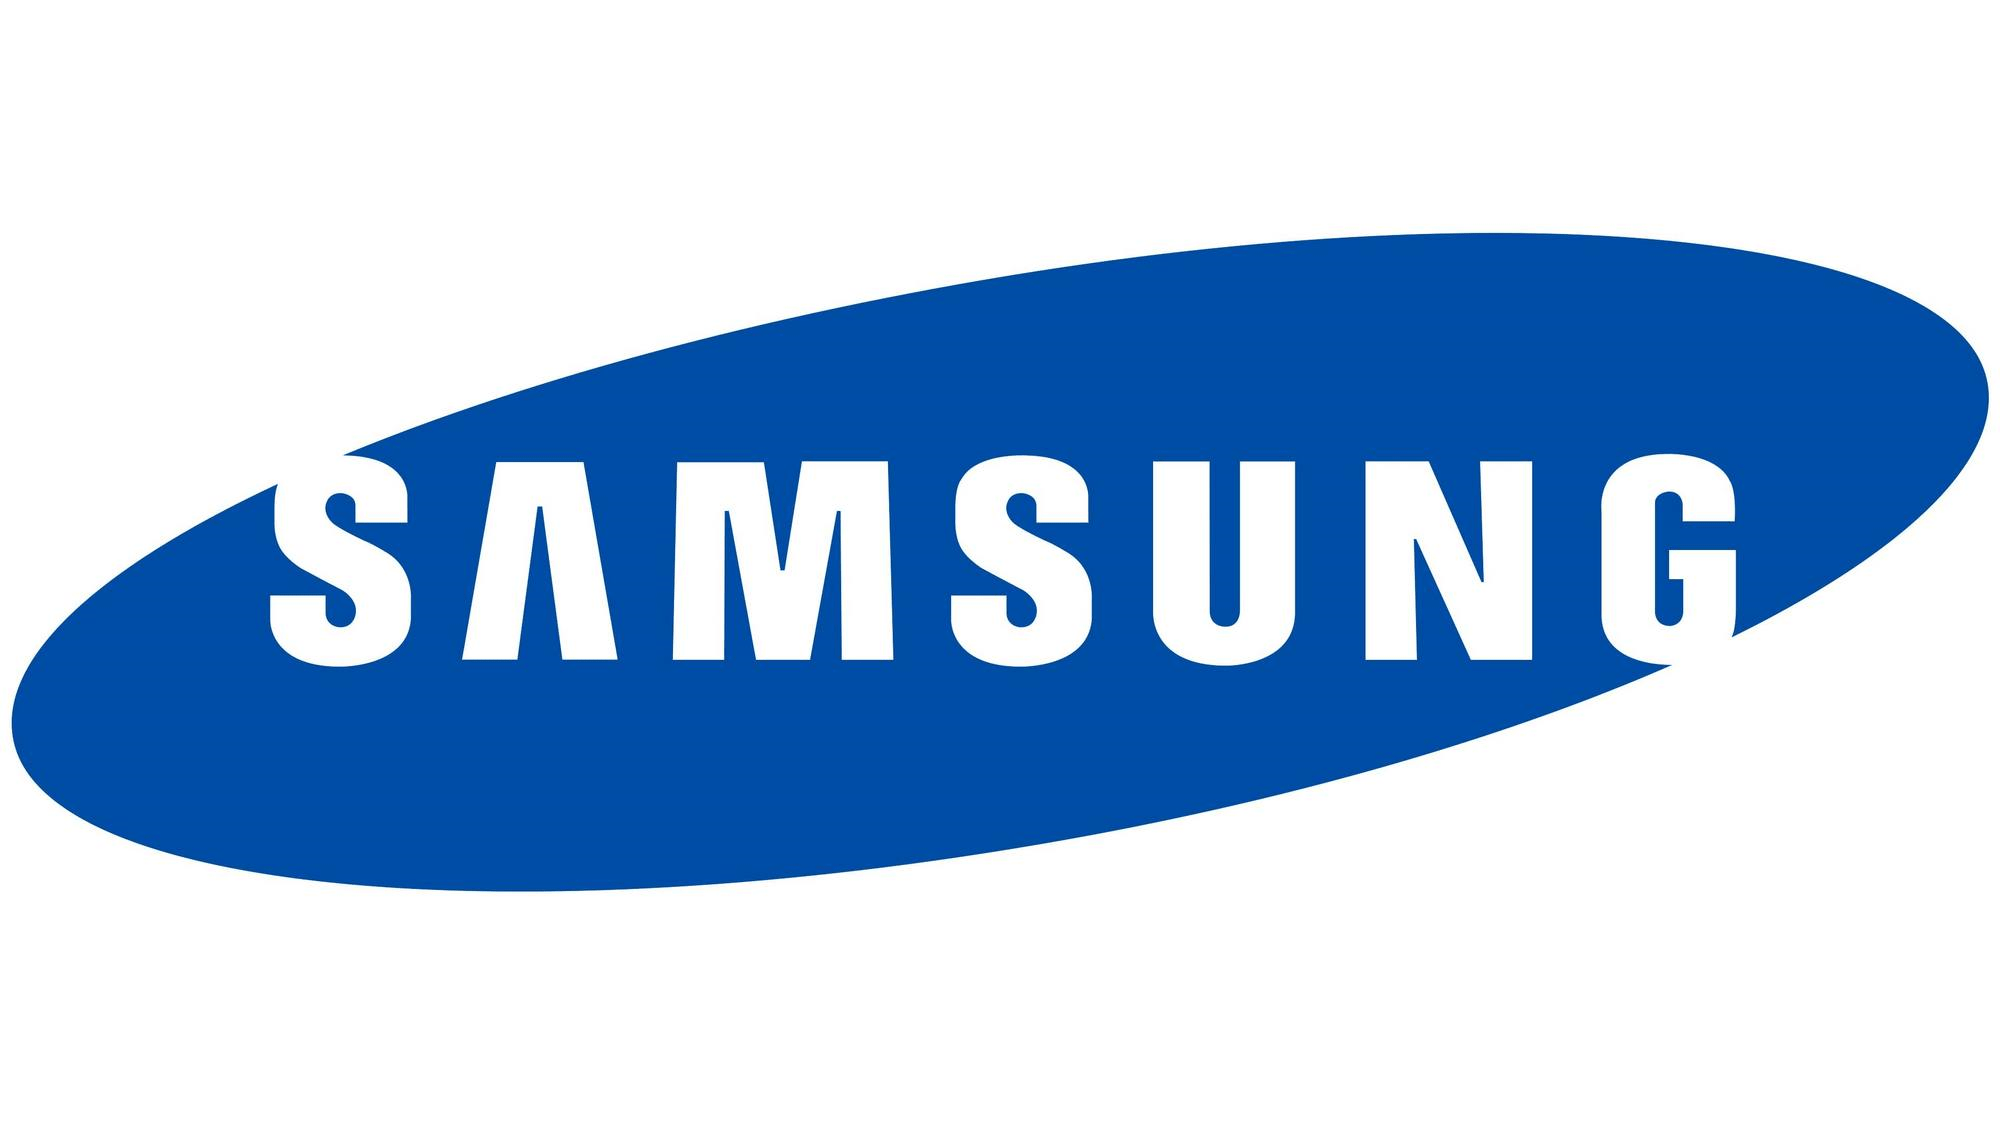 Over-10-billion-dollars-in-inheritance-taxes-will-be-paid-by-the-Samsung